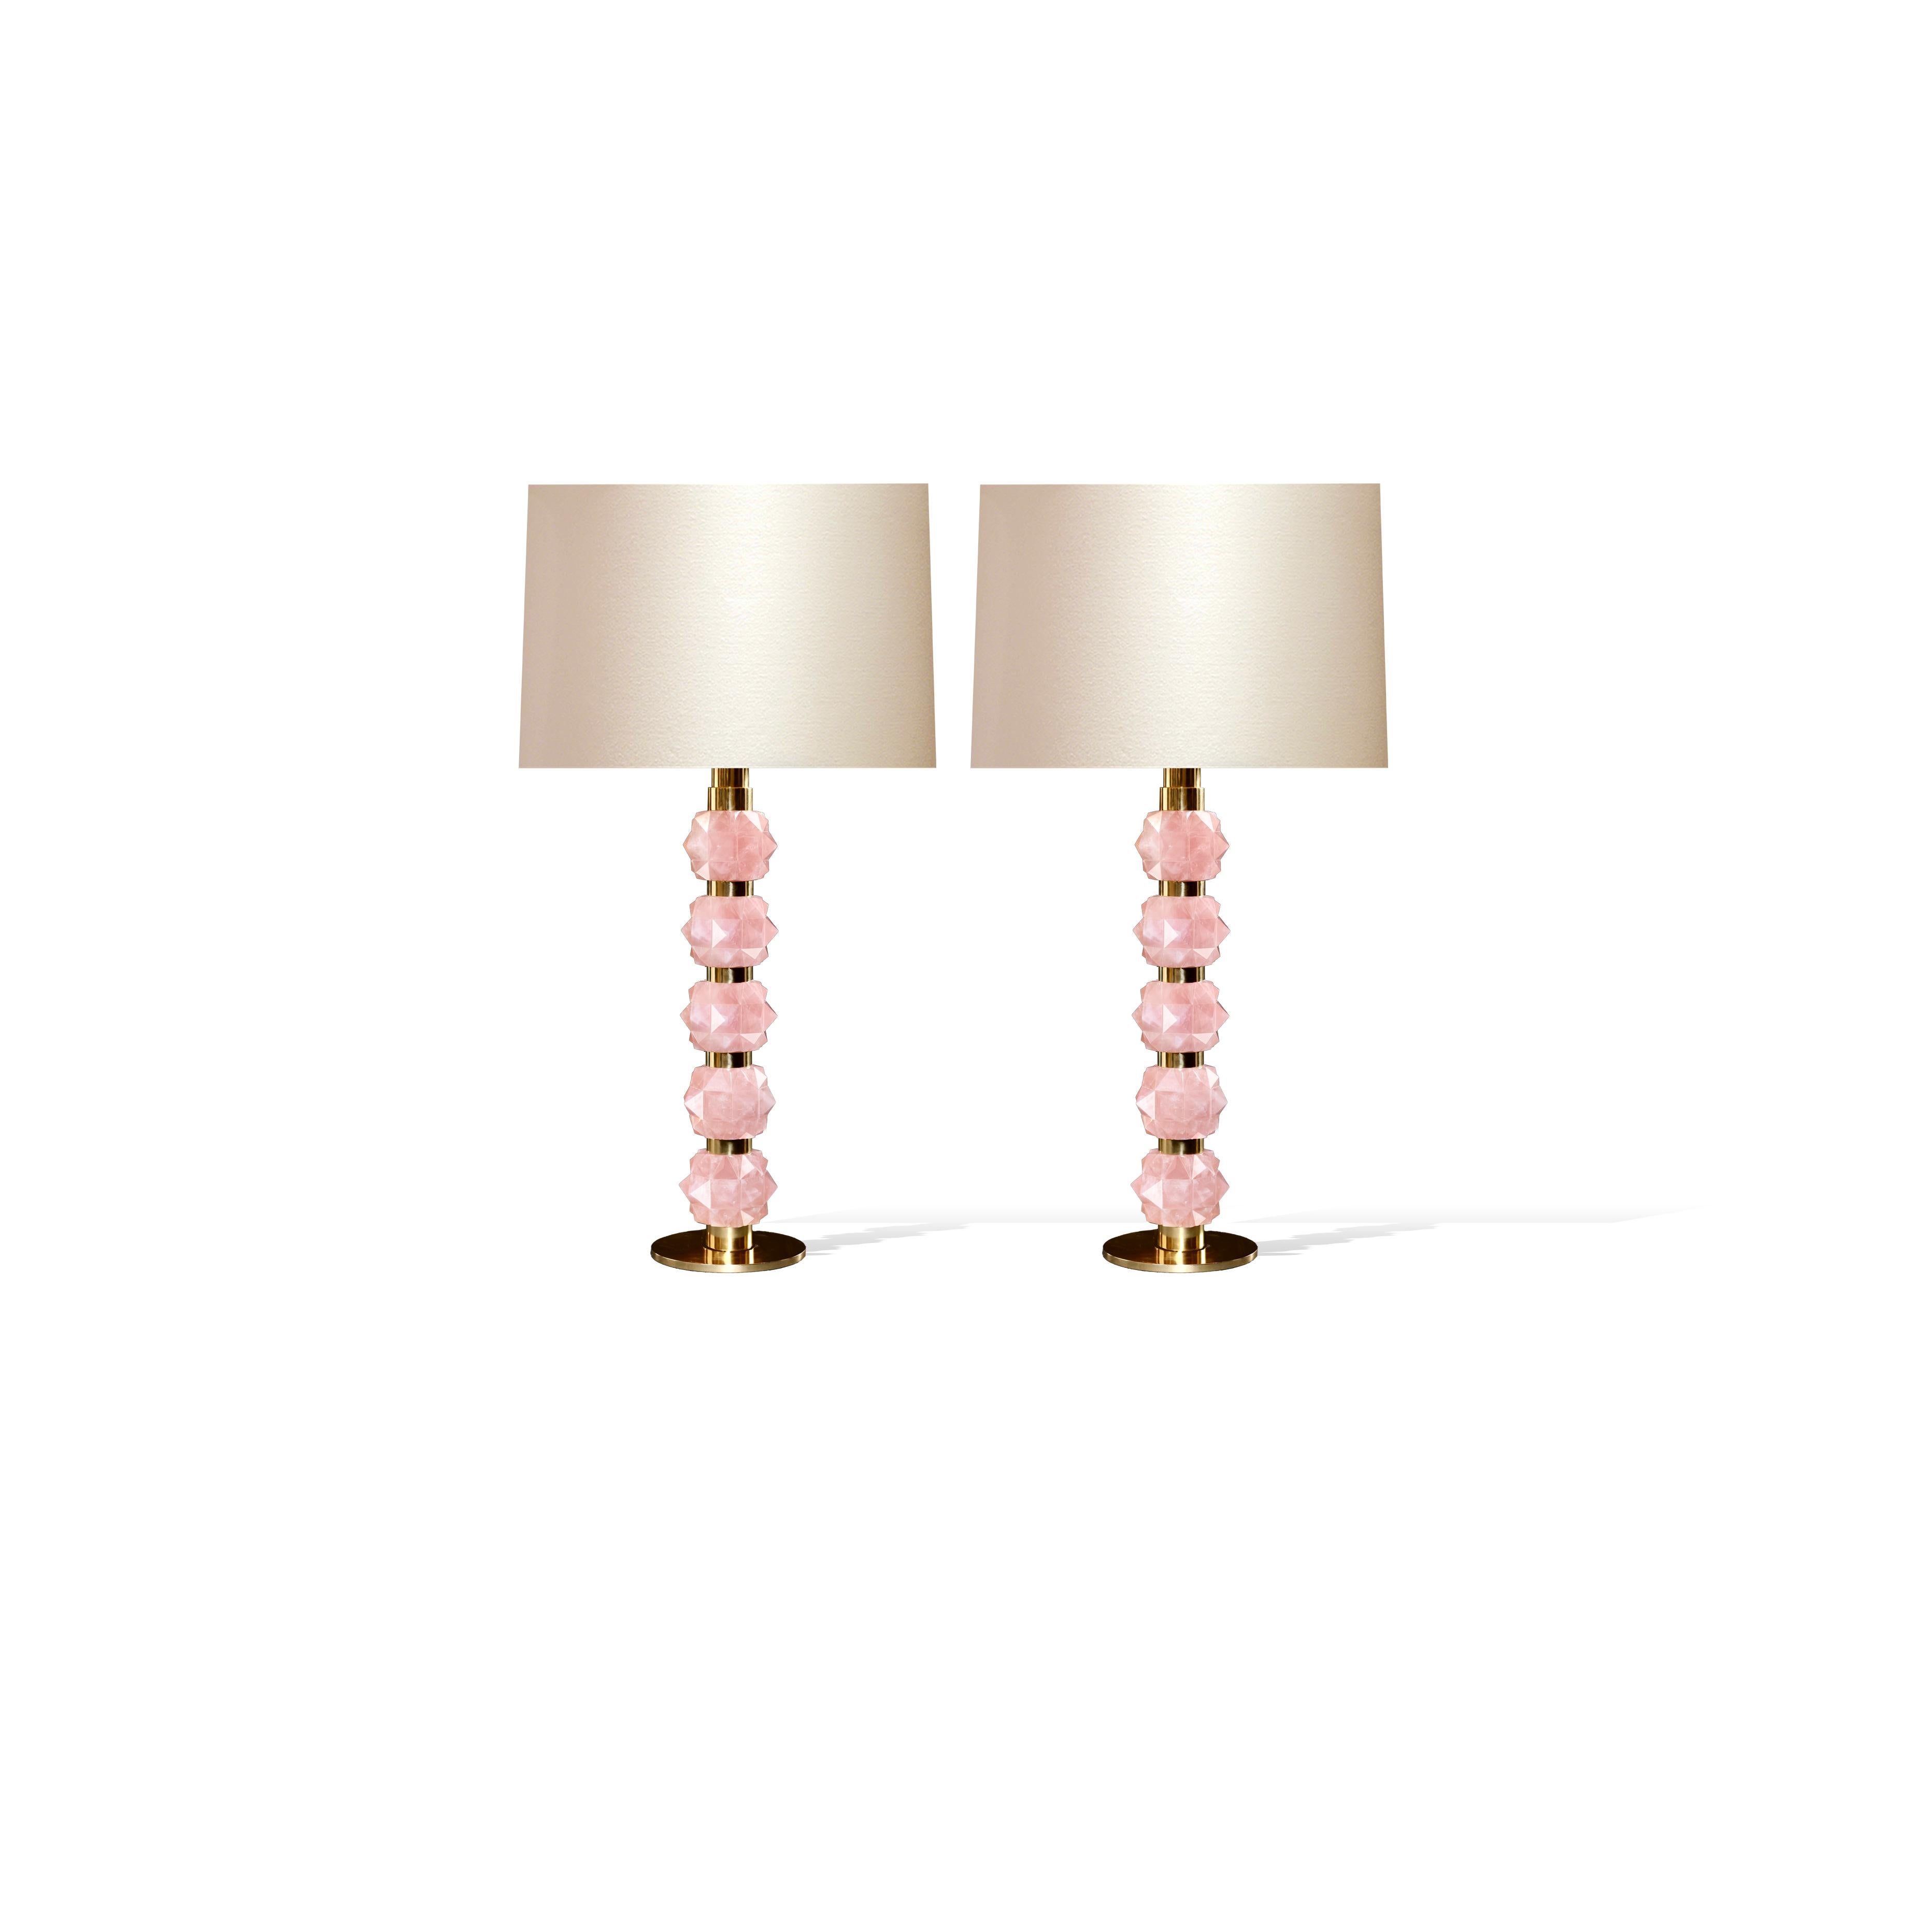 Pair of multi faceted pink rock crystal quartz lamps with polished brass decorations, created by Phoenix gallery.
Lampshades not included.
To the top of the rock crystal 23 inch.